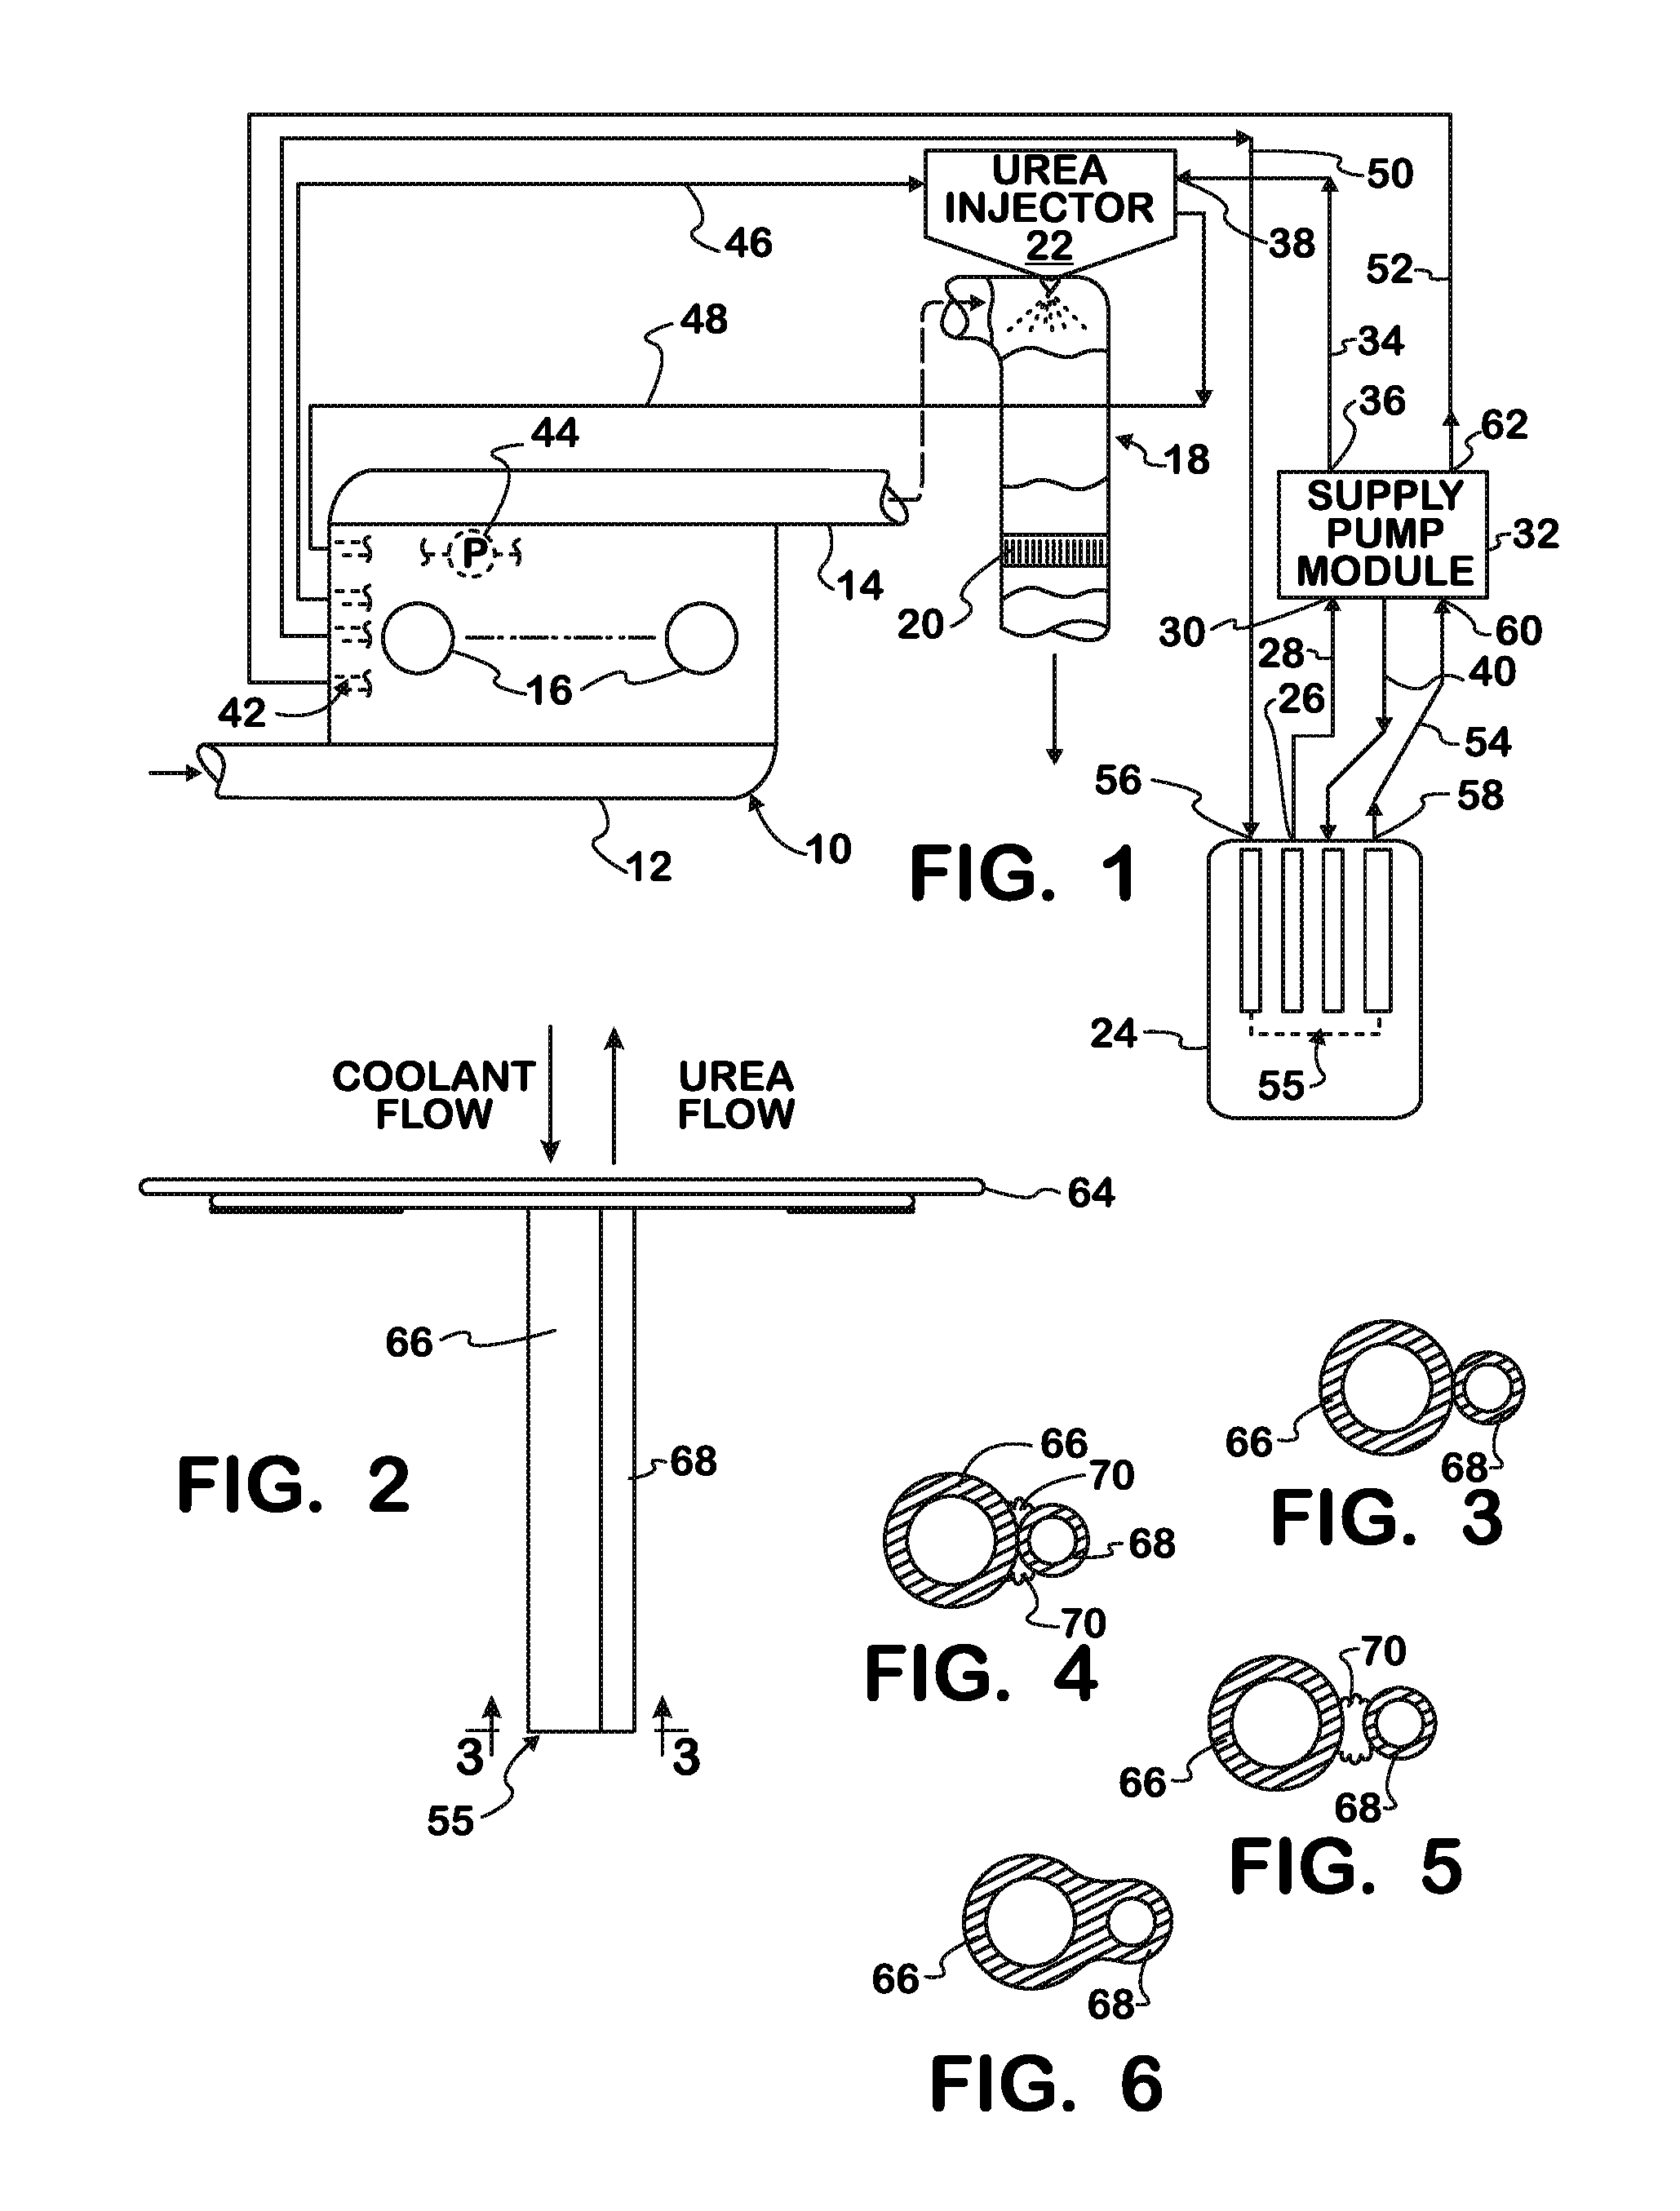 Quick-heating of a urea supply conduit for an engine exhaust after-treatment system